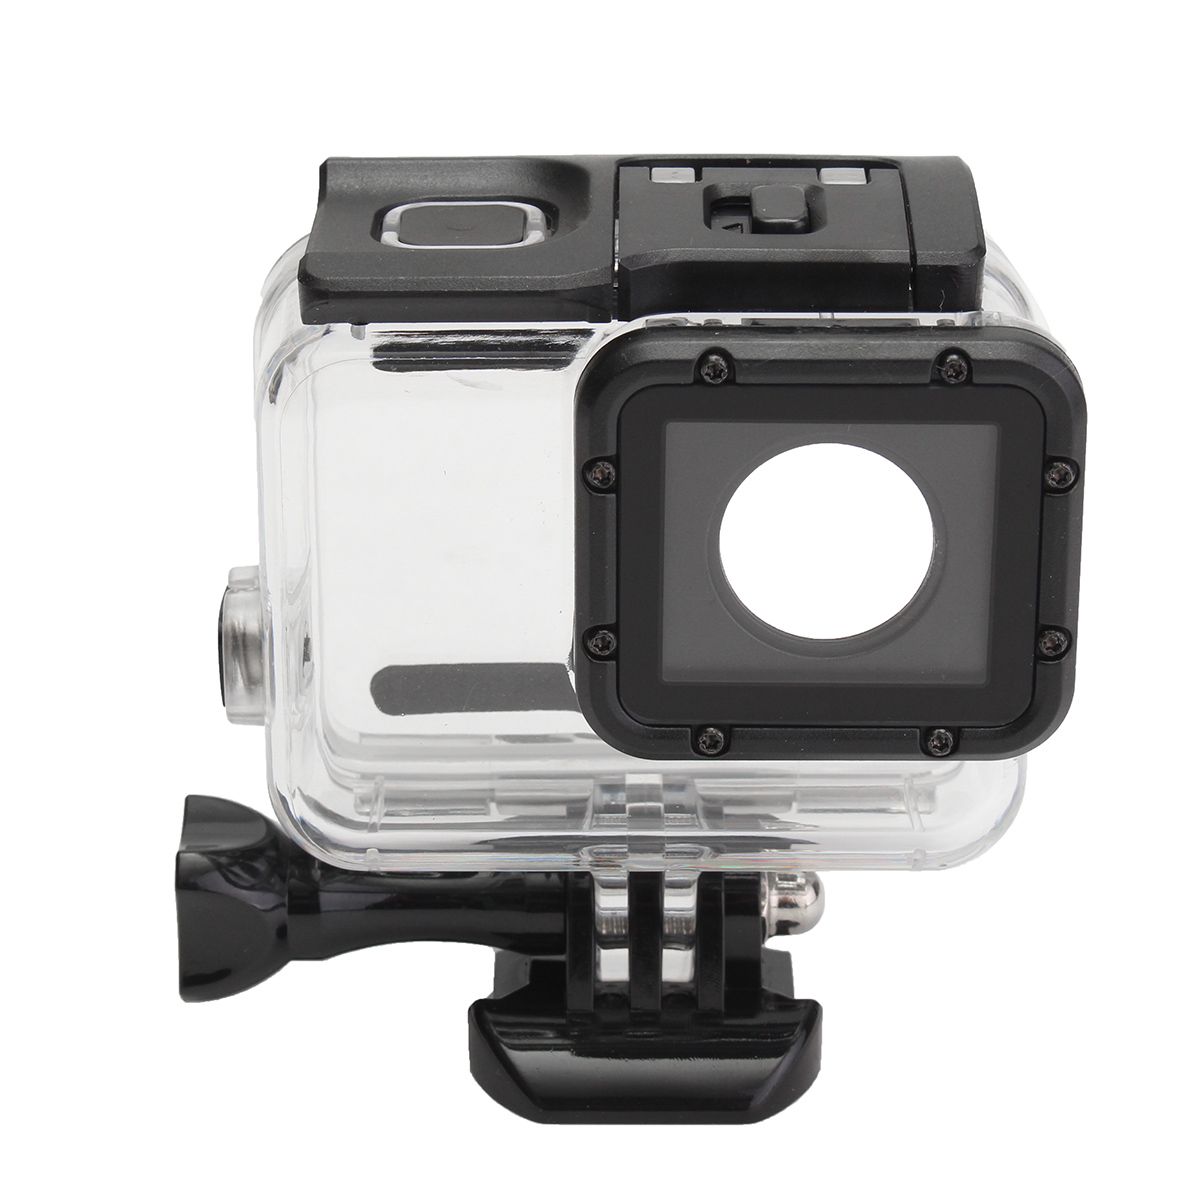 60M-Waterproof-Housing-Case-with-Tough-Screenn-Back-Door-Cover-For-Gopro-Hero-5-Black-1112421